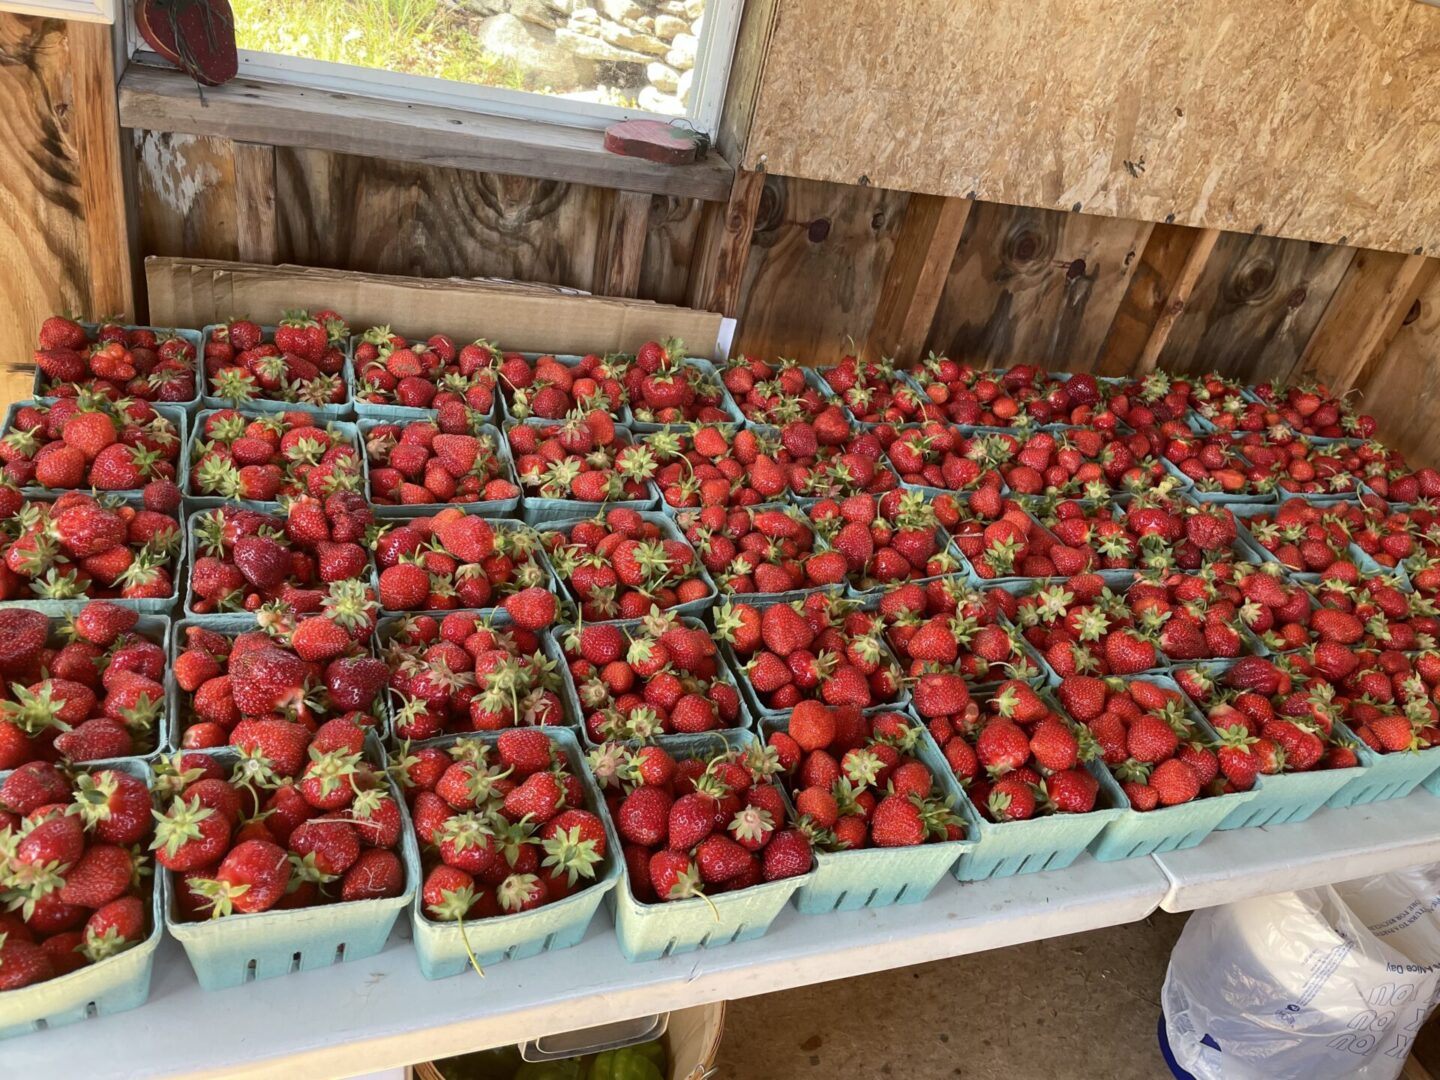 Several containers filled with strawberries